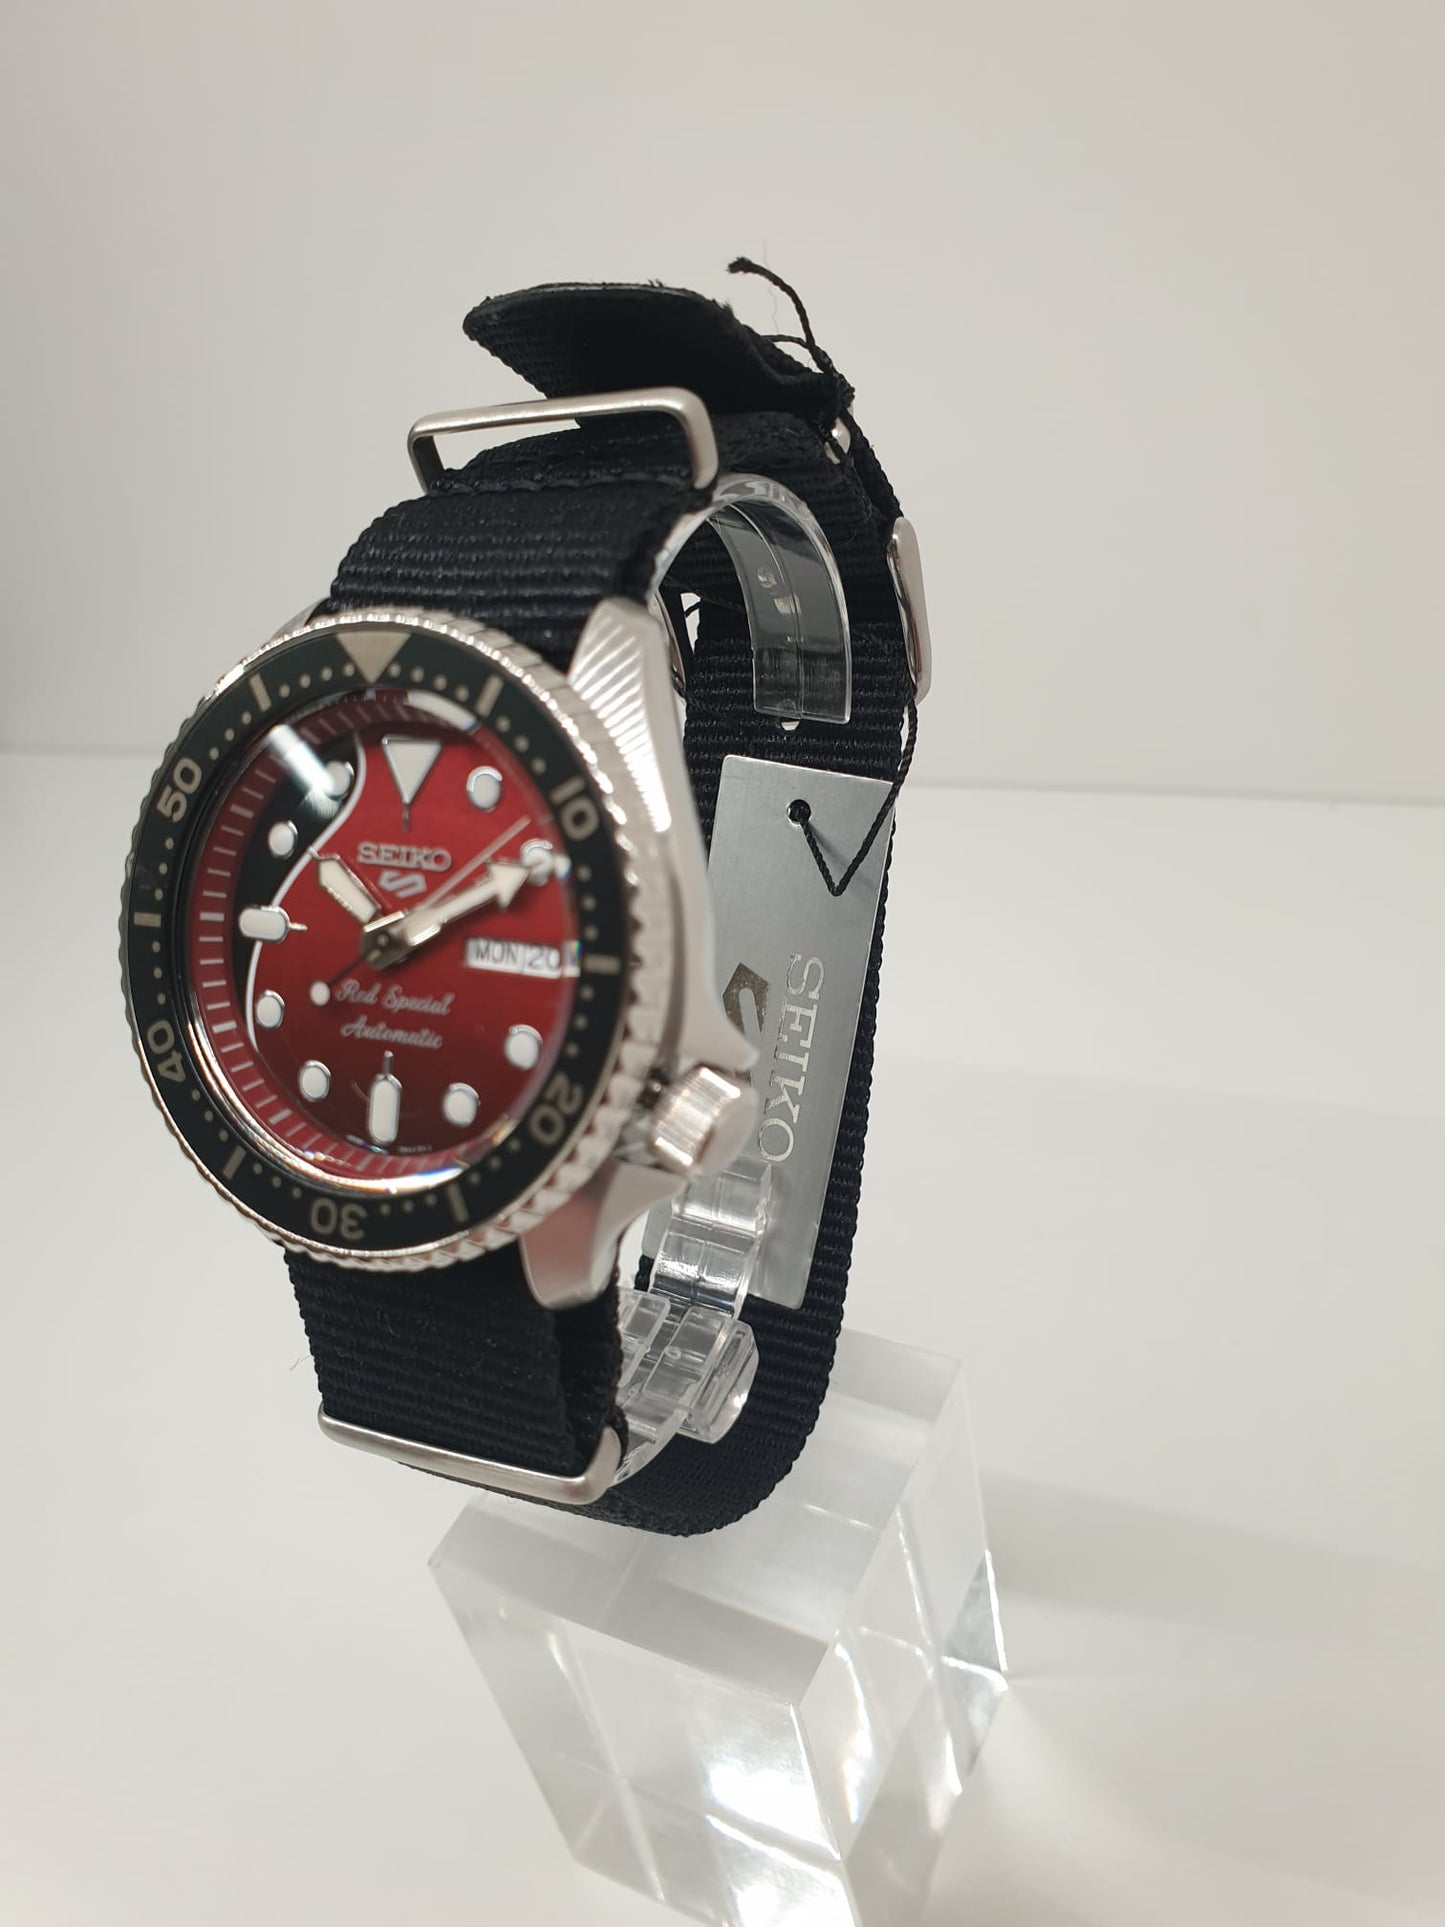 Seiko 5 Sports Brian May Limited Edition Ref: SRPE83K1